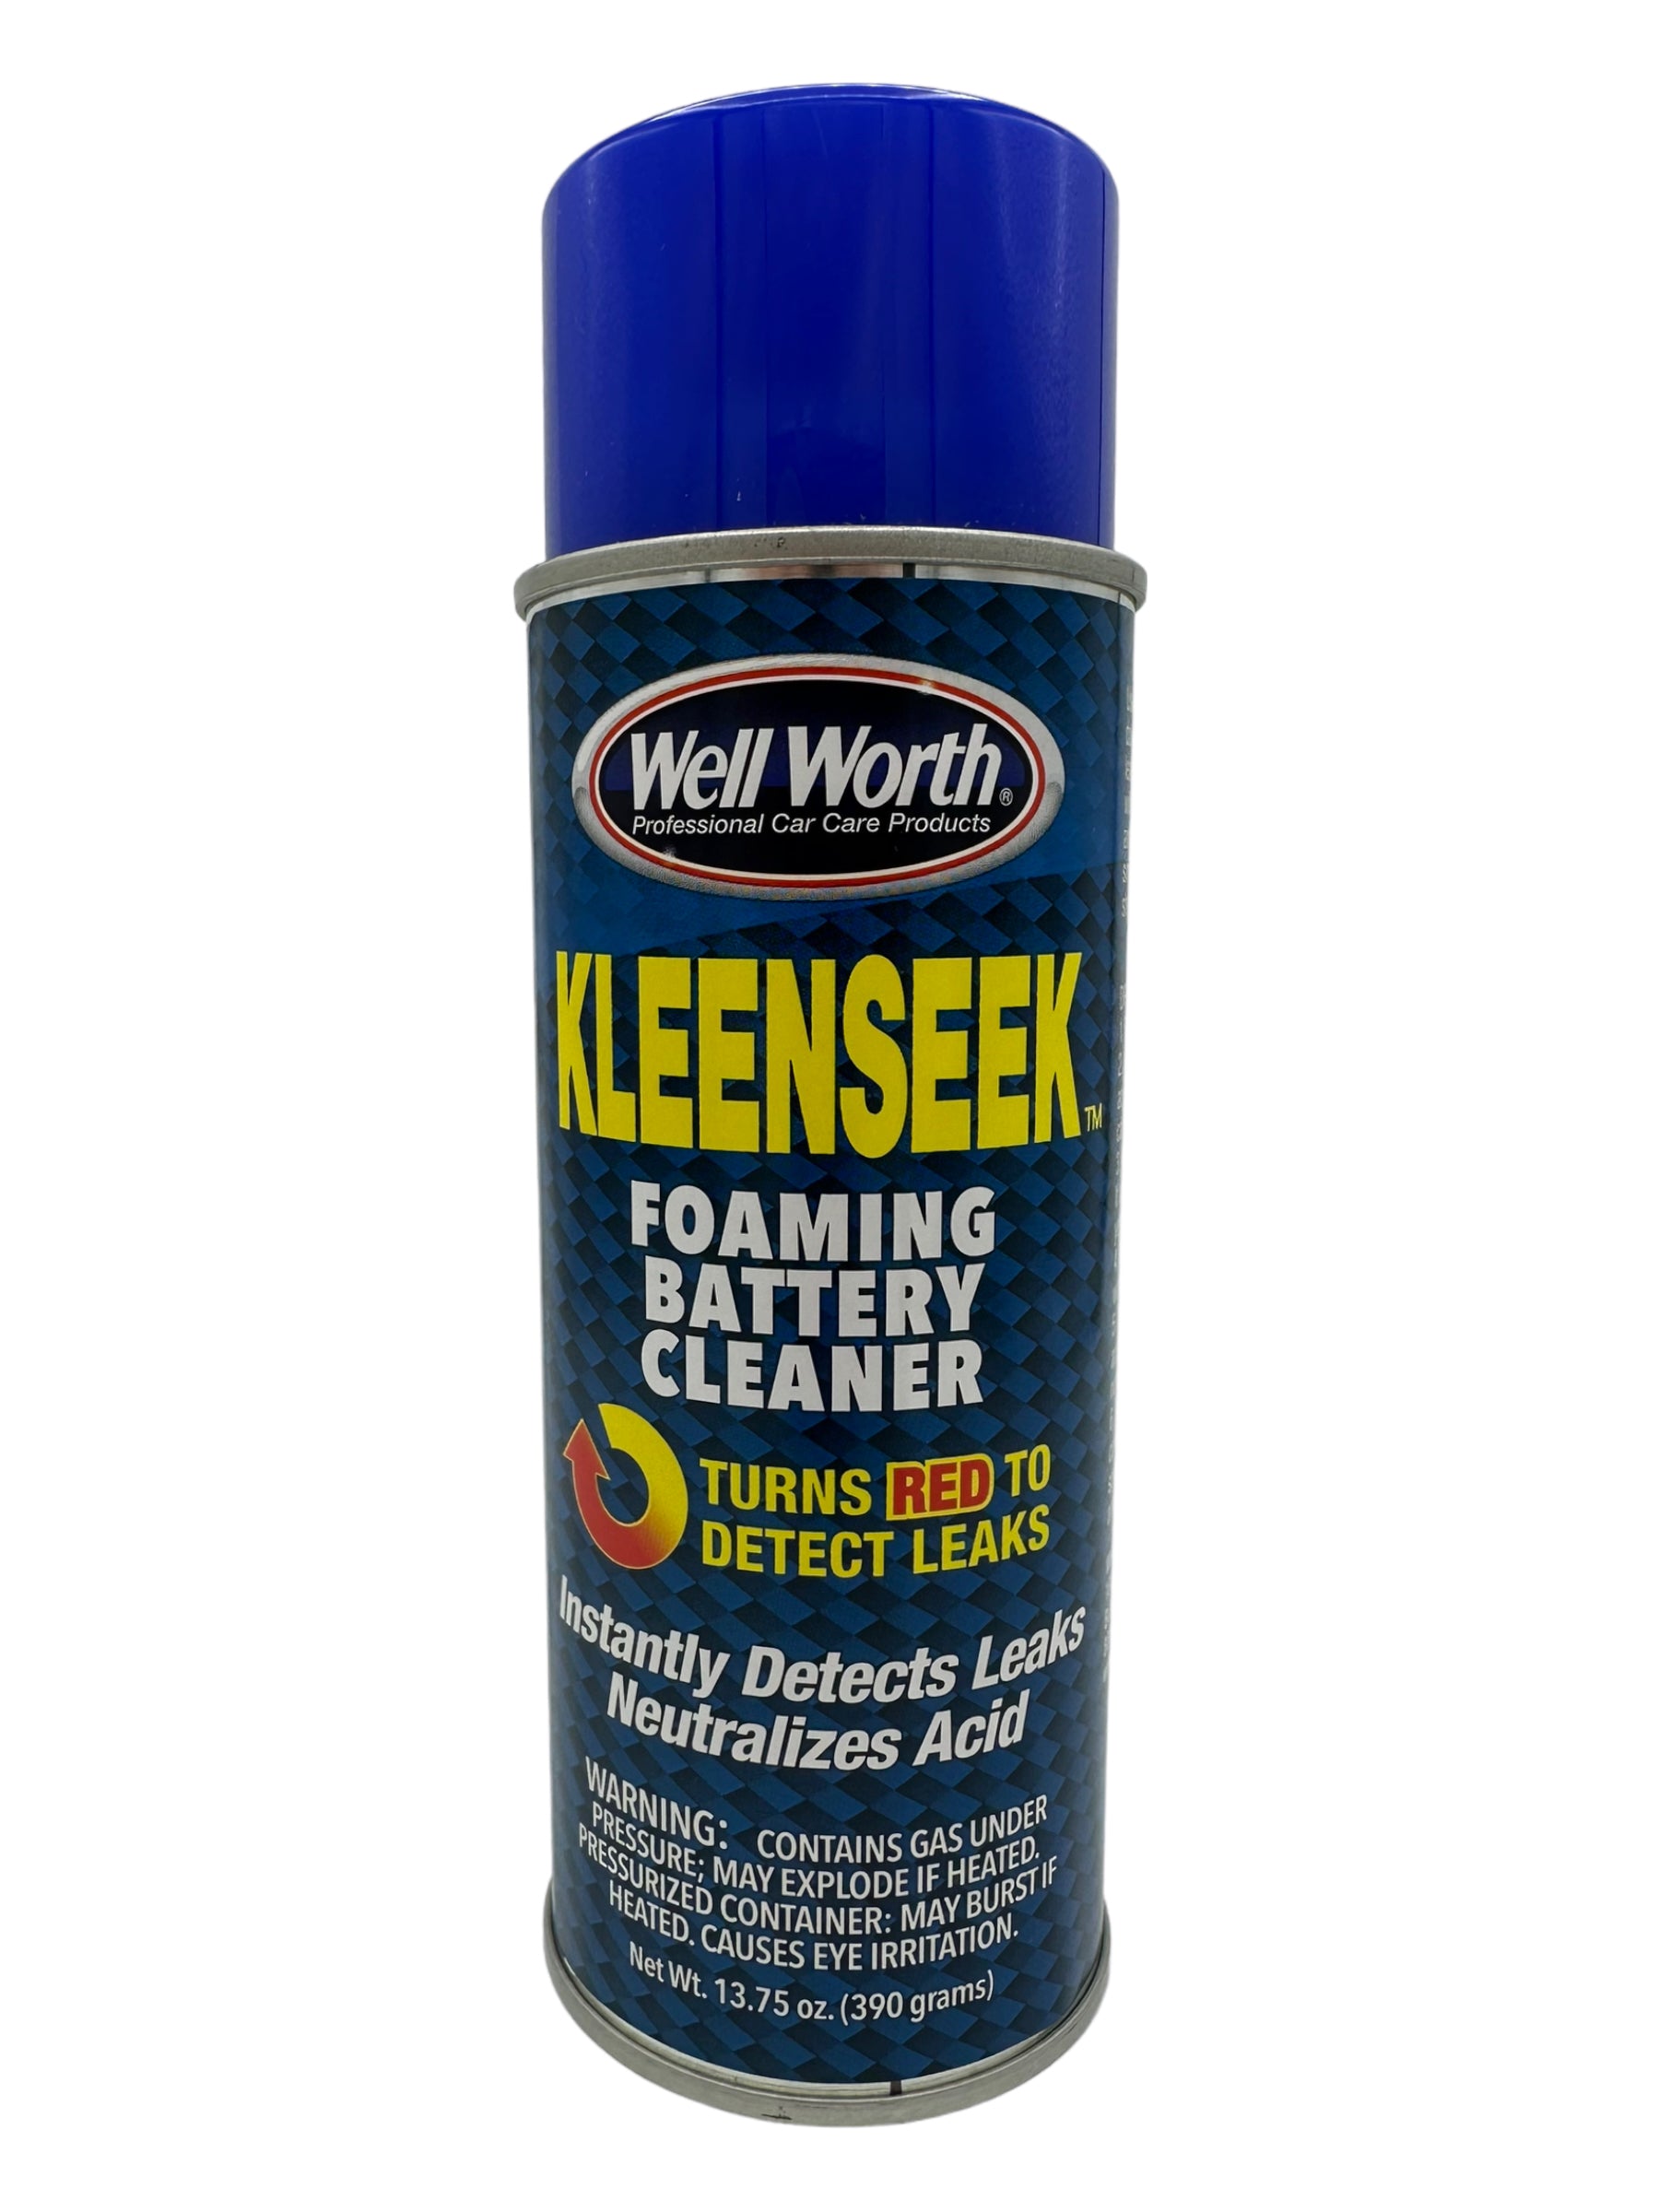 Kleen Seek Foaming Battery Cleaner - Well Worth Professional Car Care  Products